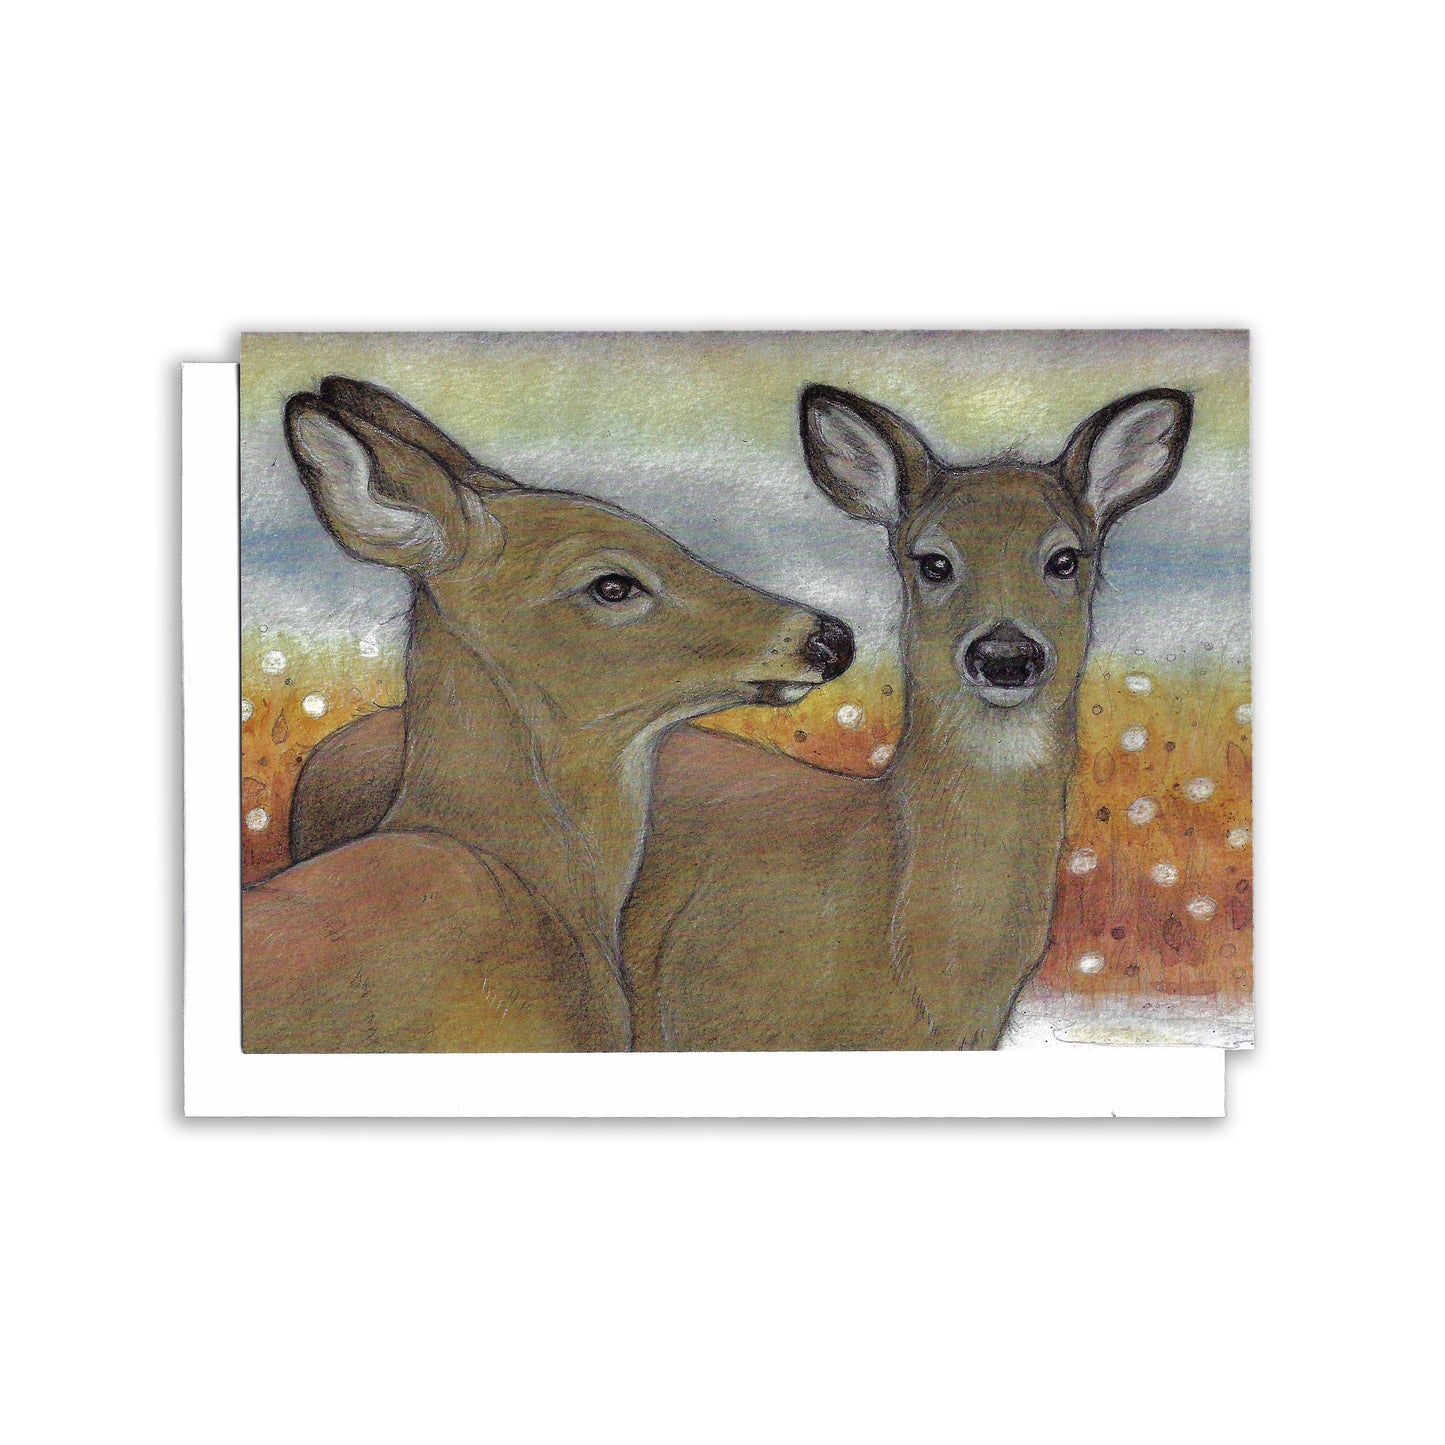 illustrated Greeting Card of two white tailed deers with snowflakes falling 